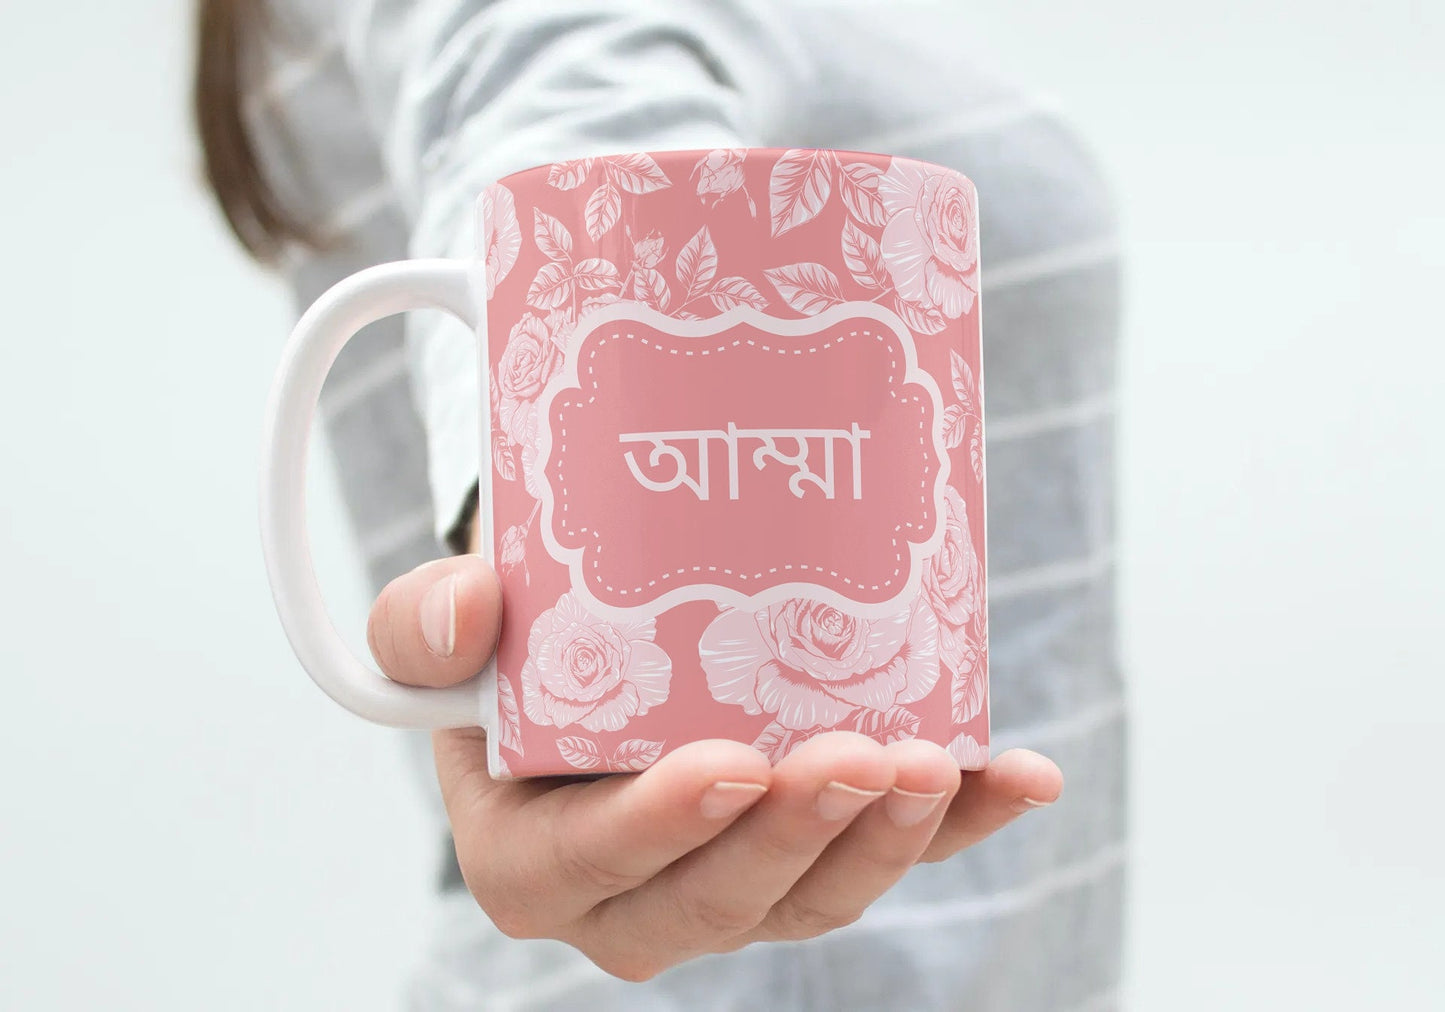 Amma Bangla Greeting card in nice Peach, Mothers day or Birthday Greeting card in Bengali